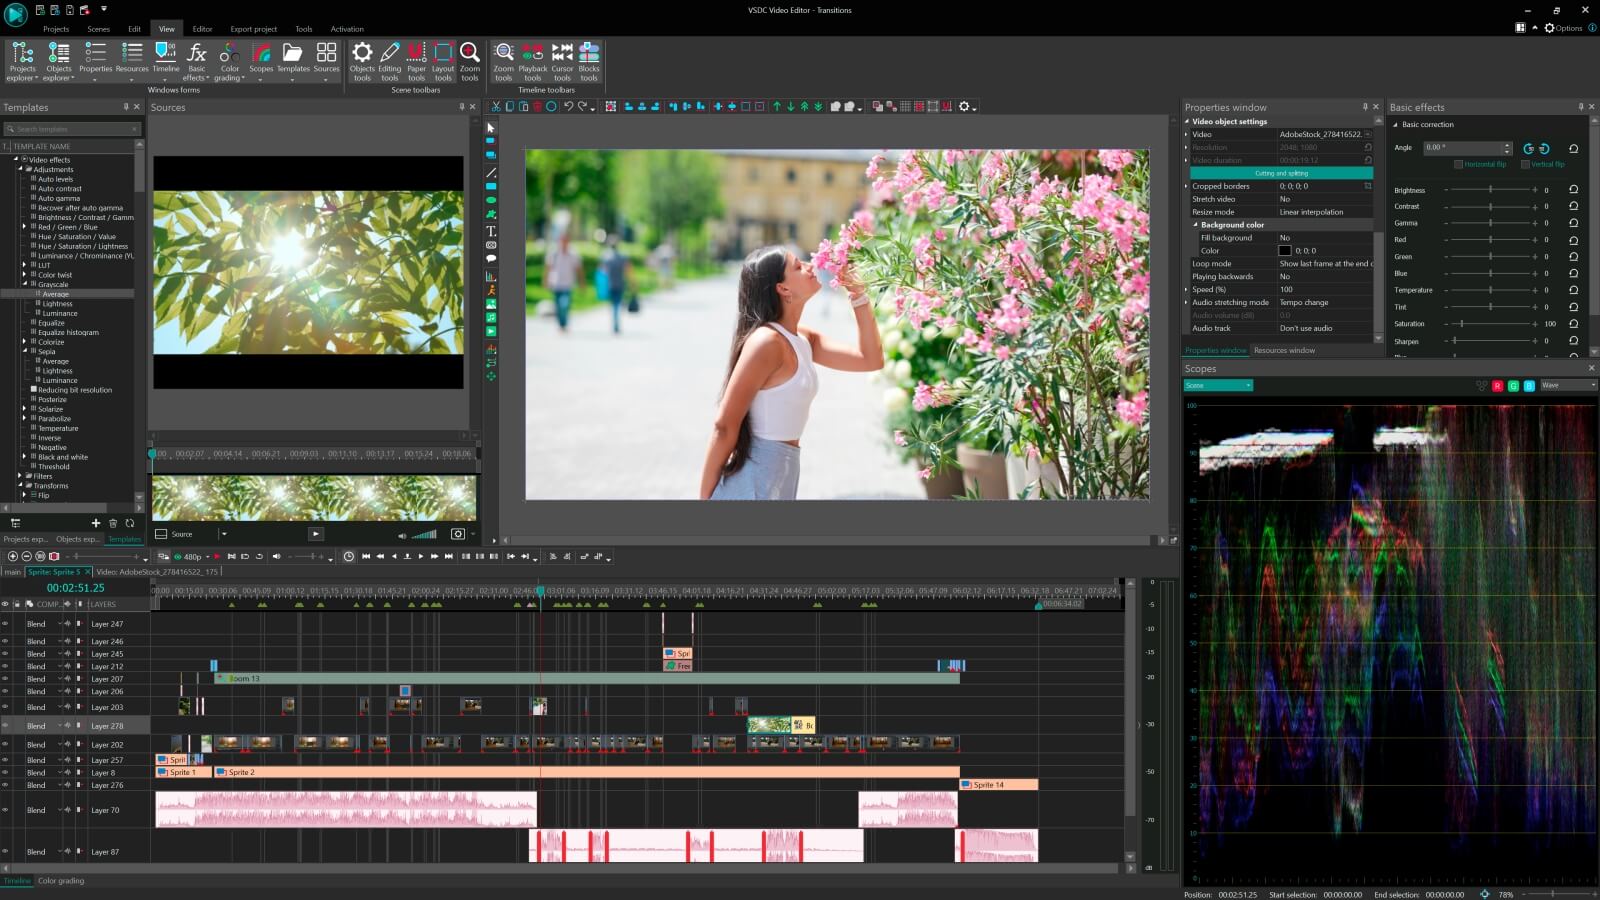 Online video editing software free download iso 13320 pdf free download